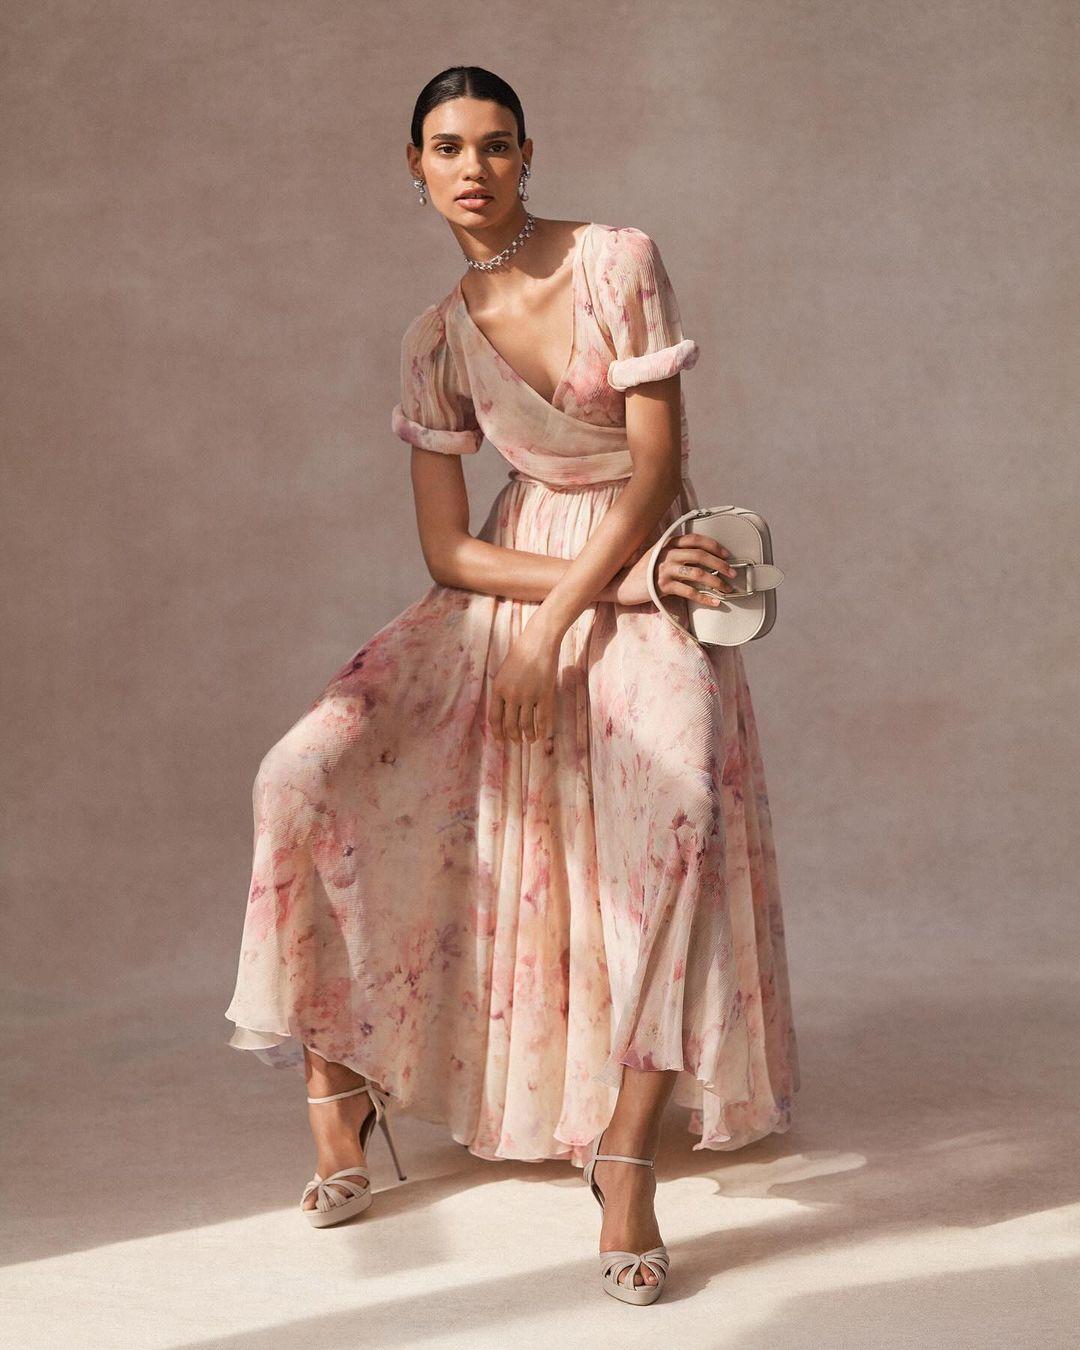 Ralph Lauren celebrates an effortless mode of styling this season, pushing up the Skielar gown’s sleeves and pairing the dress with a #WelingtonCollection bag. 

Draped and shirred with crinkle silk chiffon, the Skielar is printed in Como with bouquets of pink peonies.

Explore the #RalphLauren Skielar Floral Crinkle Chiffon Day Dress and Ellasandra Floral Silk Gauze Day Dress via the link in bio.